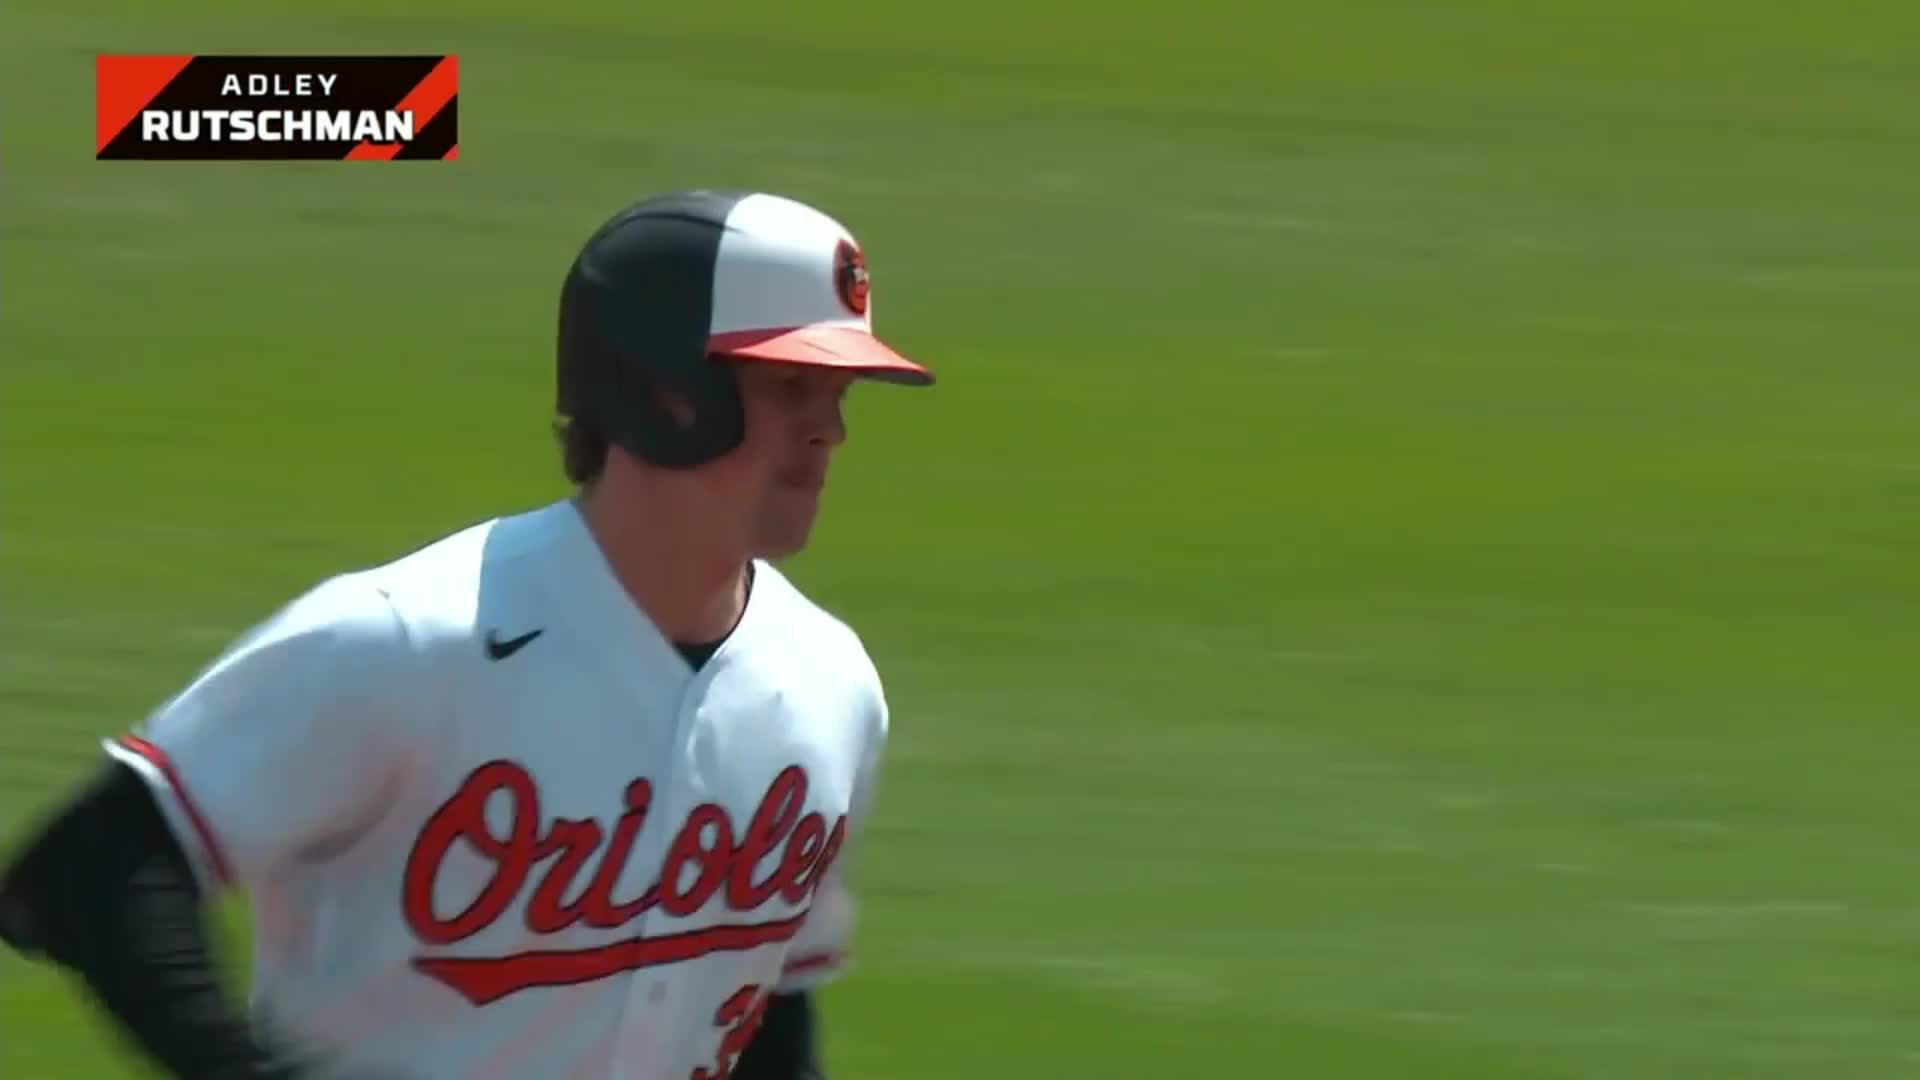 Highlight] Adley Rutschman hits an absolute bomb to give the Orioles the  lead. : r/baseball